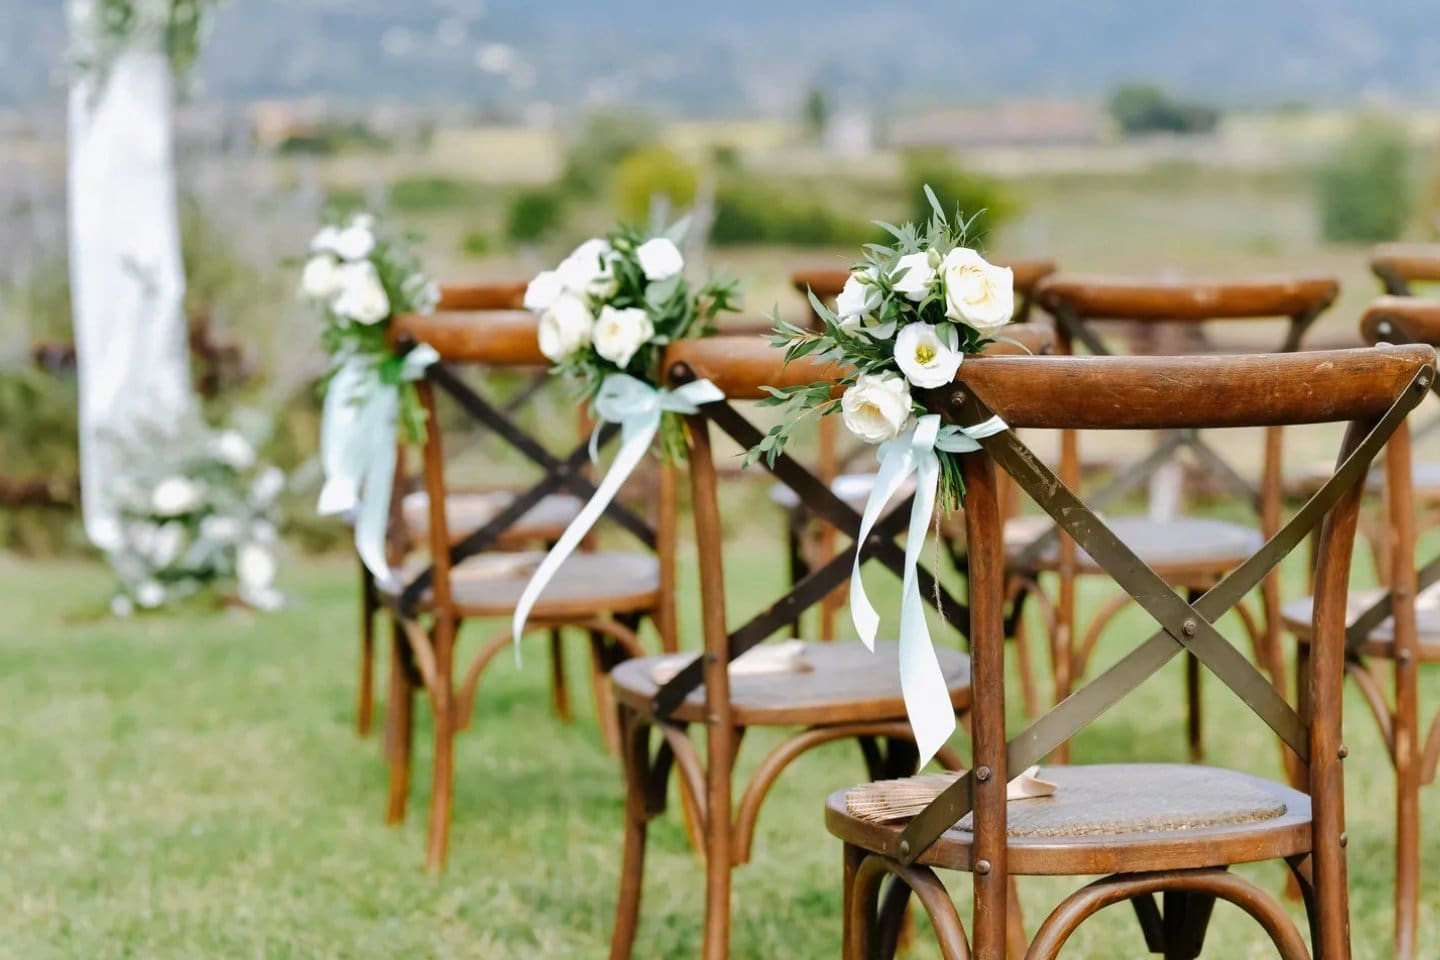 A row of wooden chairs with flowers on them.